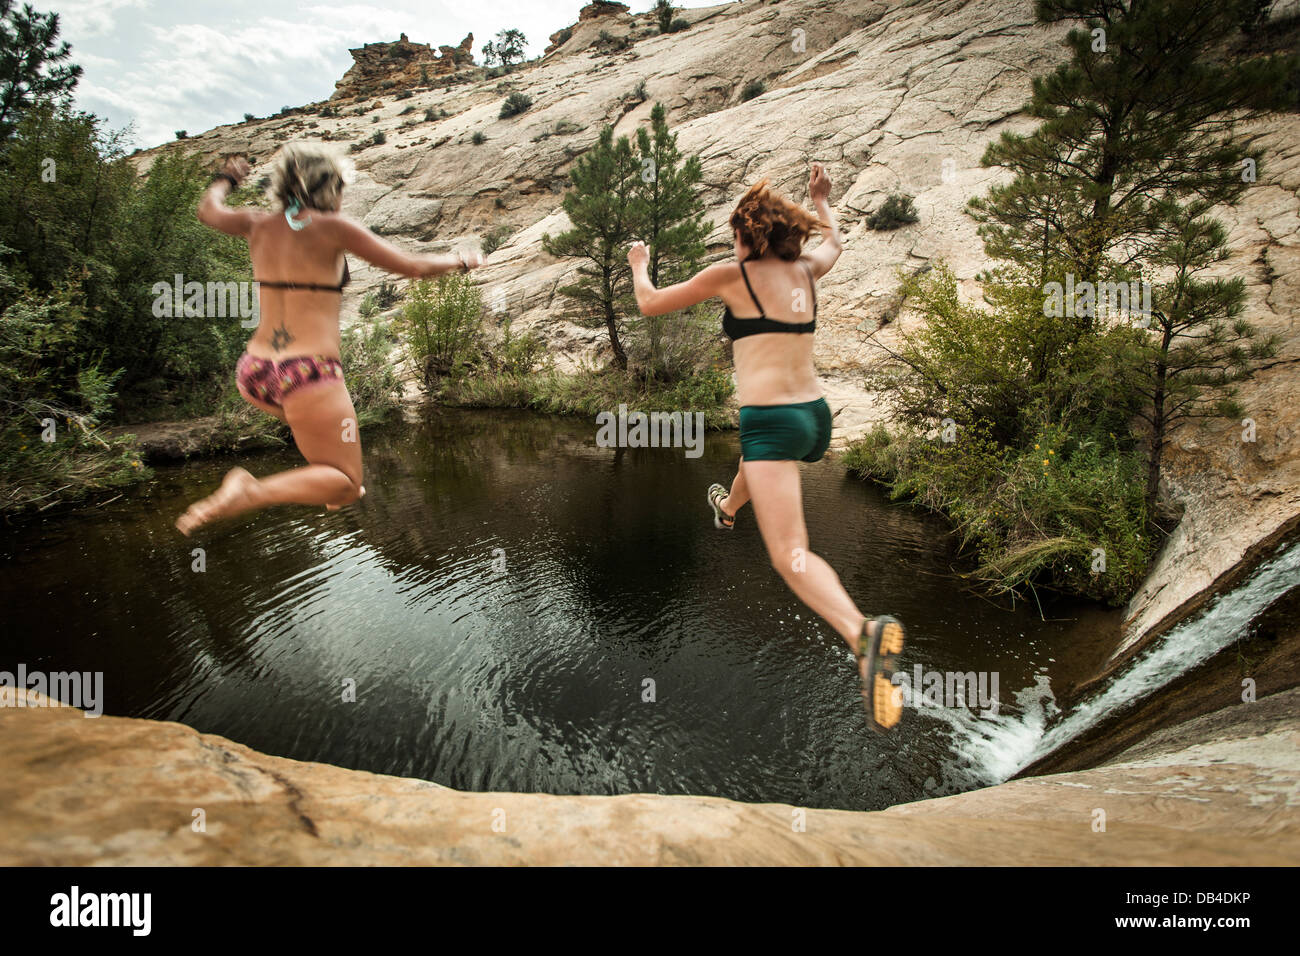 Two women jumping into a pool of water near Boulder, Utah. Stock Photo